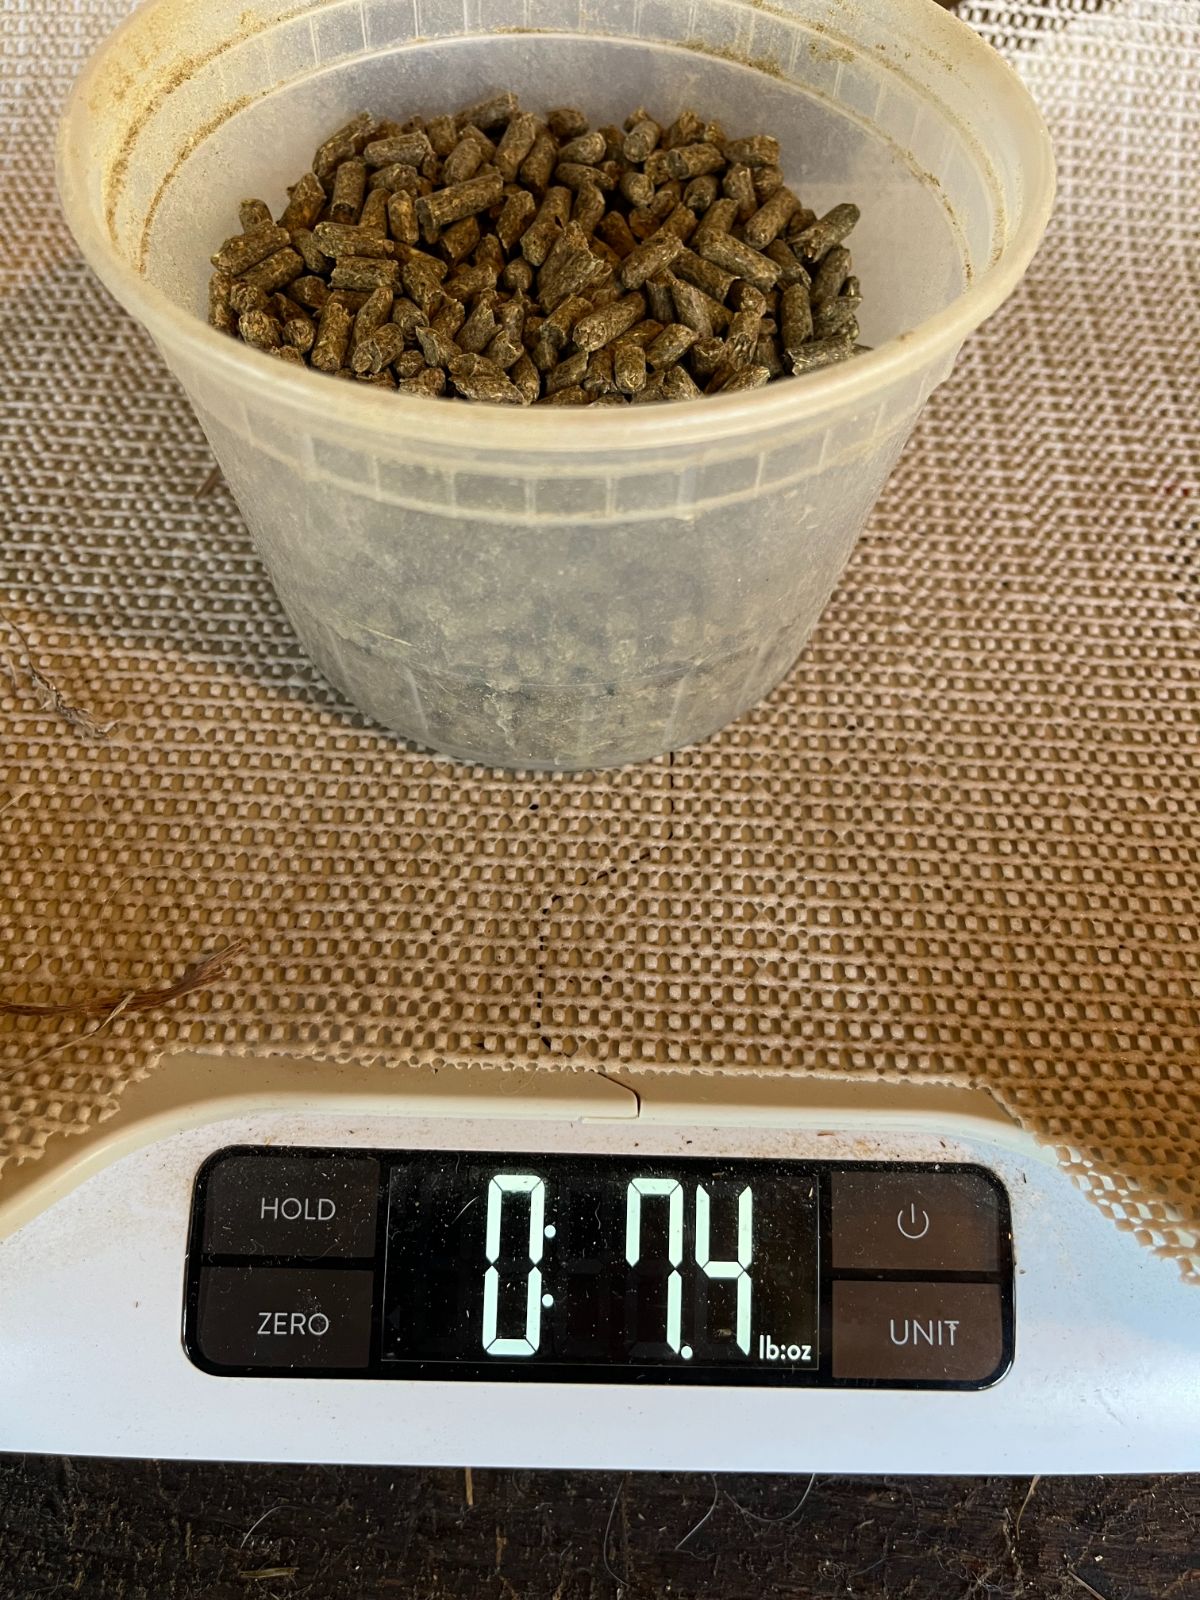 Weighing rabbit pellets by weight